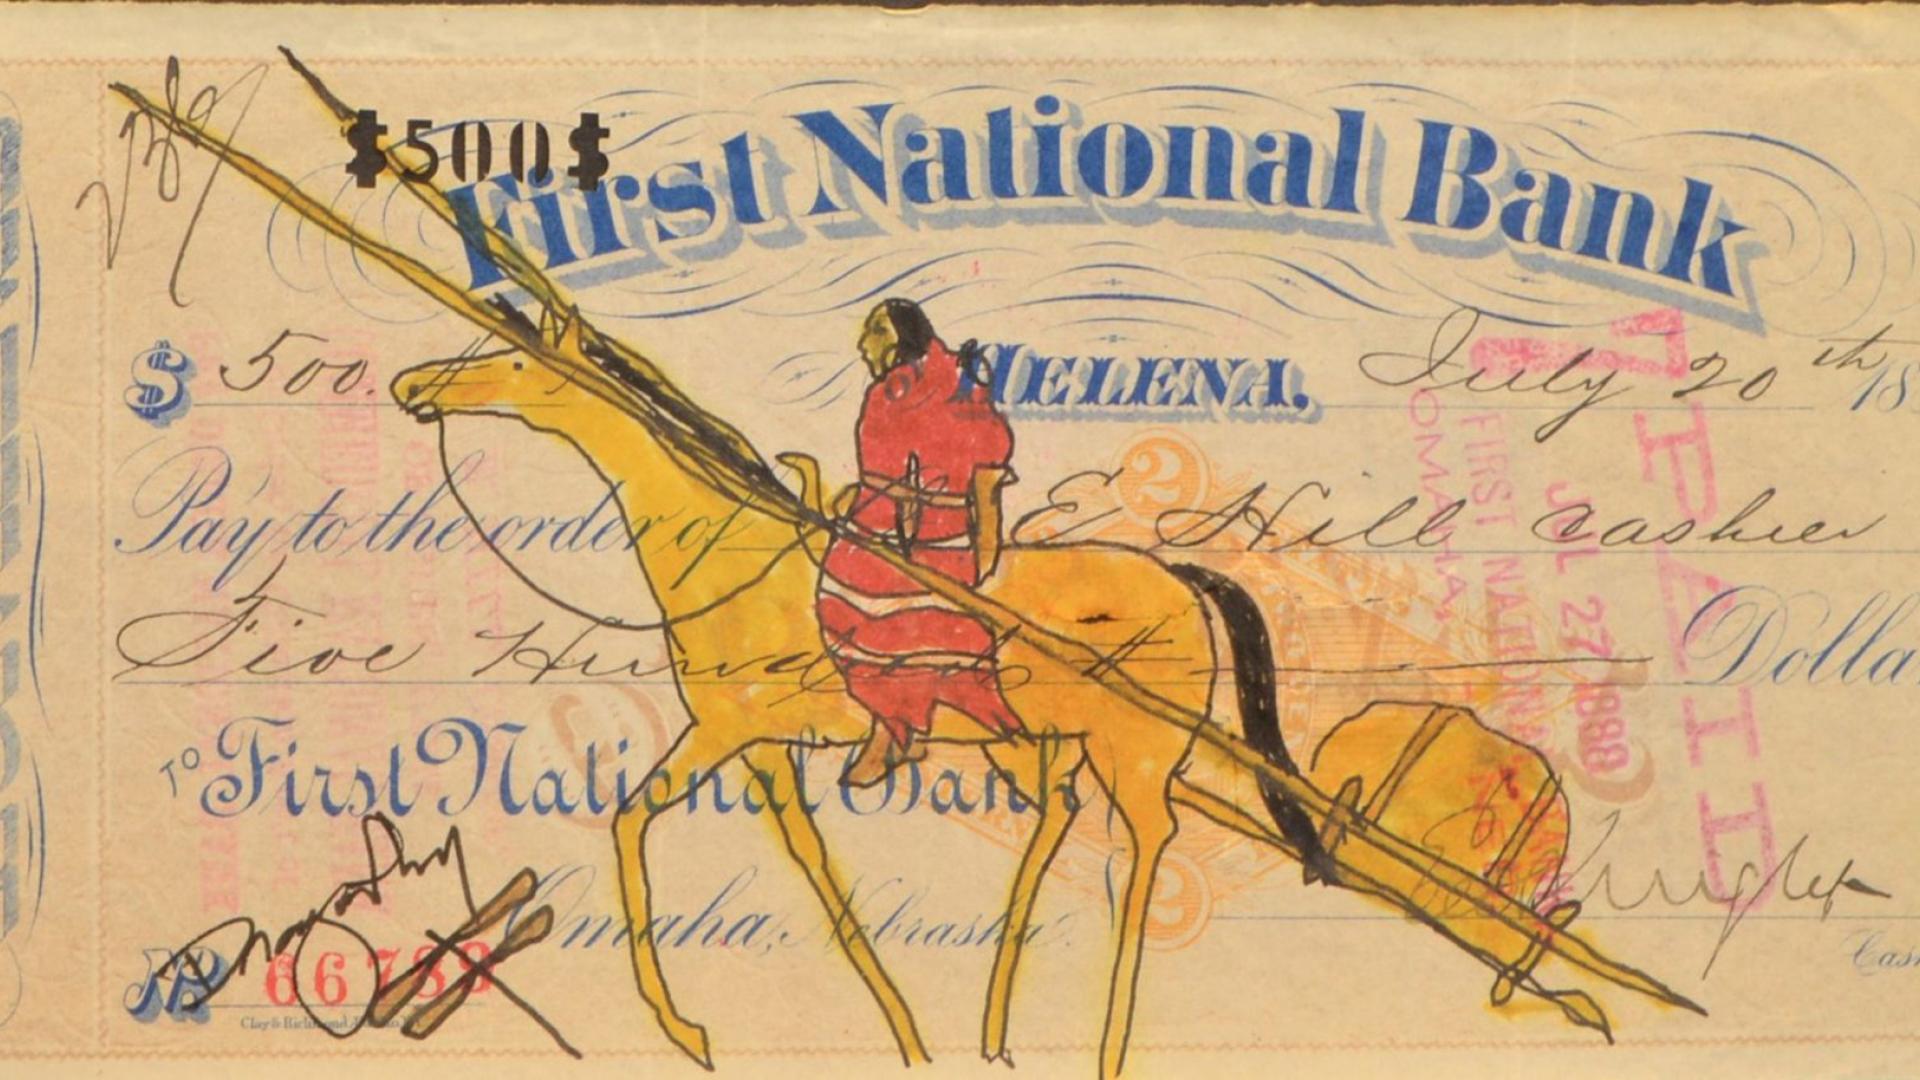 Man on horseback drawn over an antique bank certificate in a ledger art style piece.